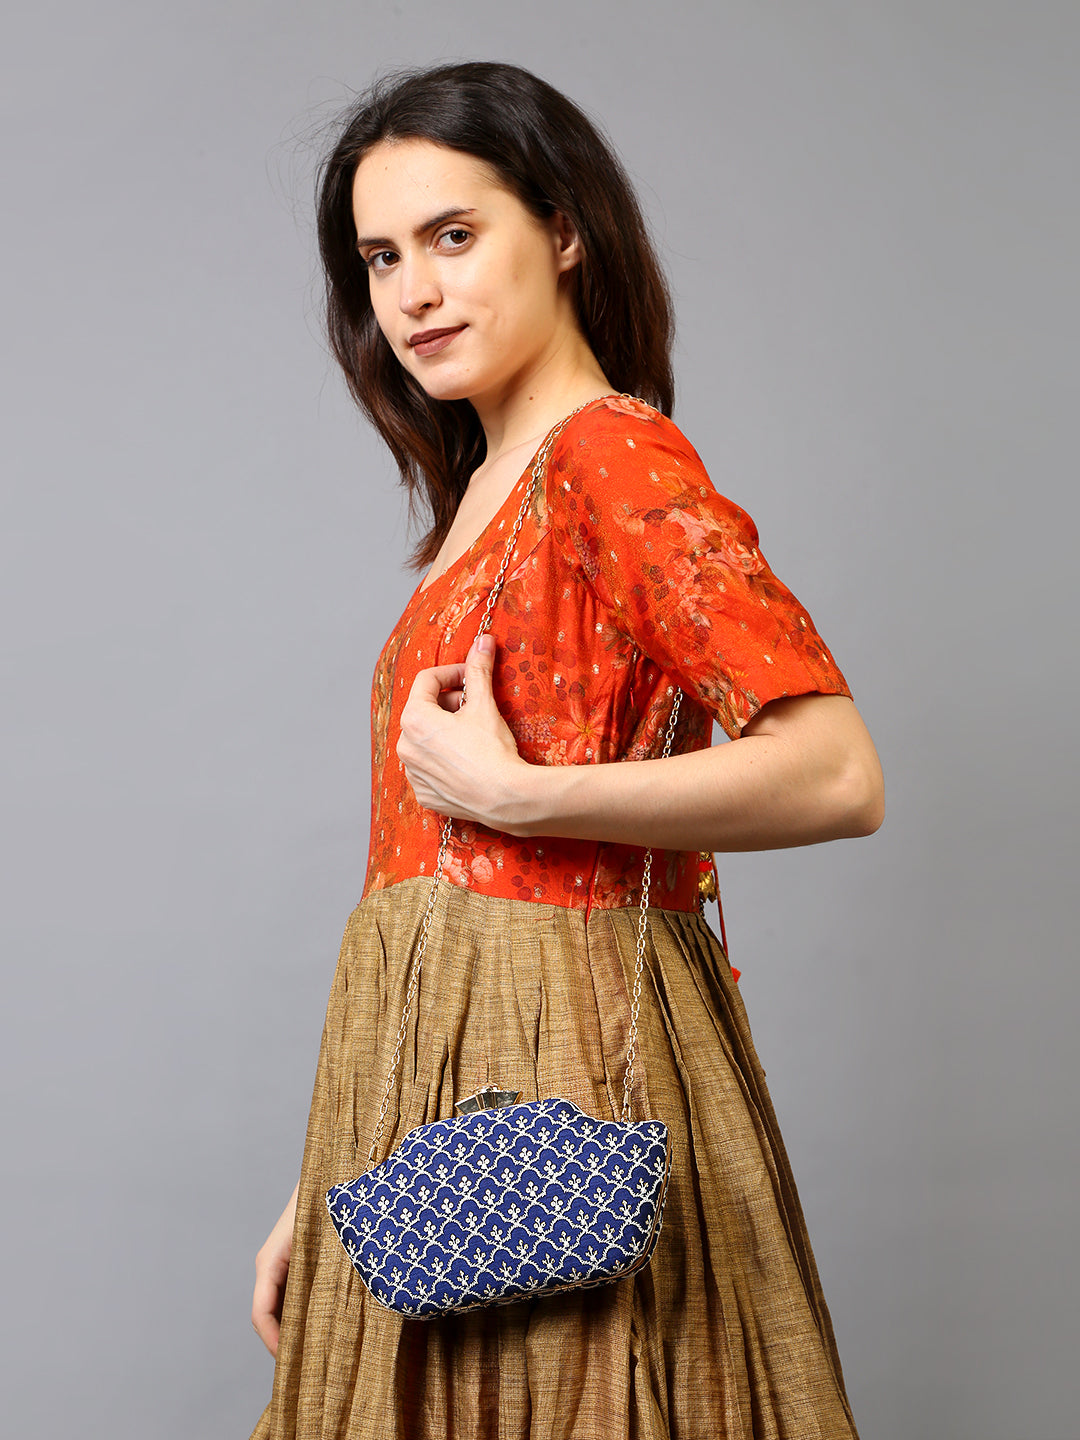 Filauri Structured Embroidery Sling Bag Navy Blue